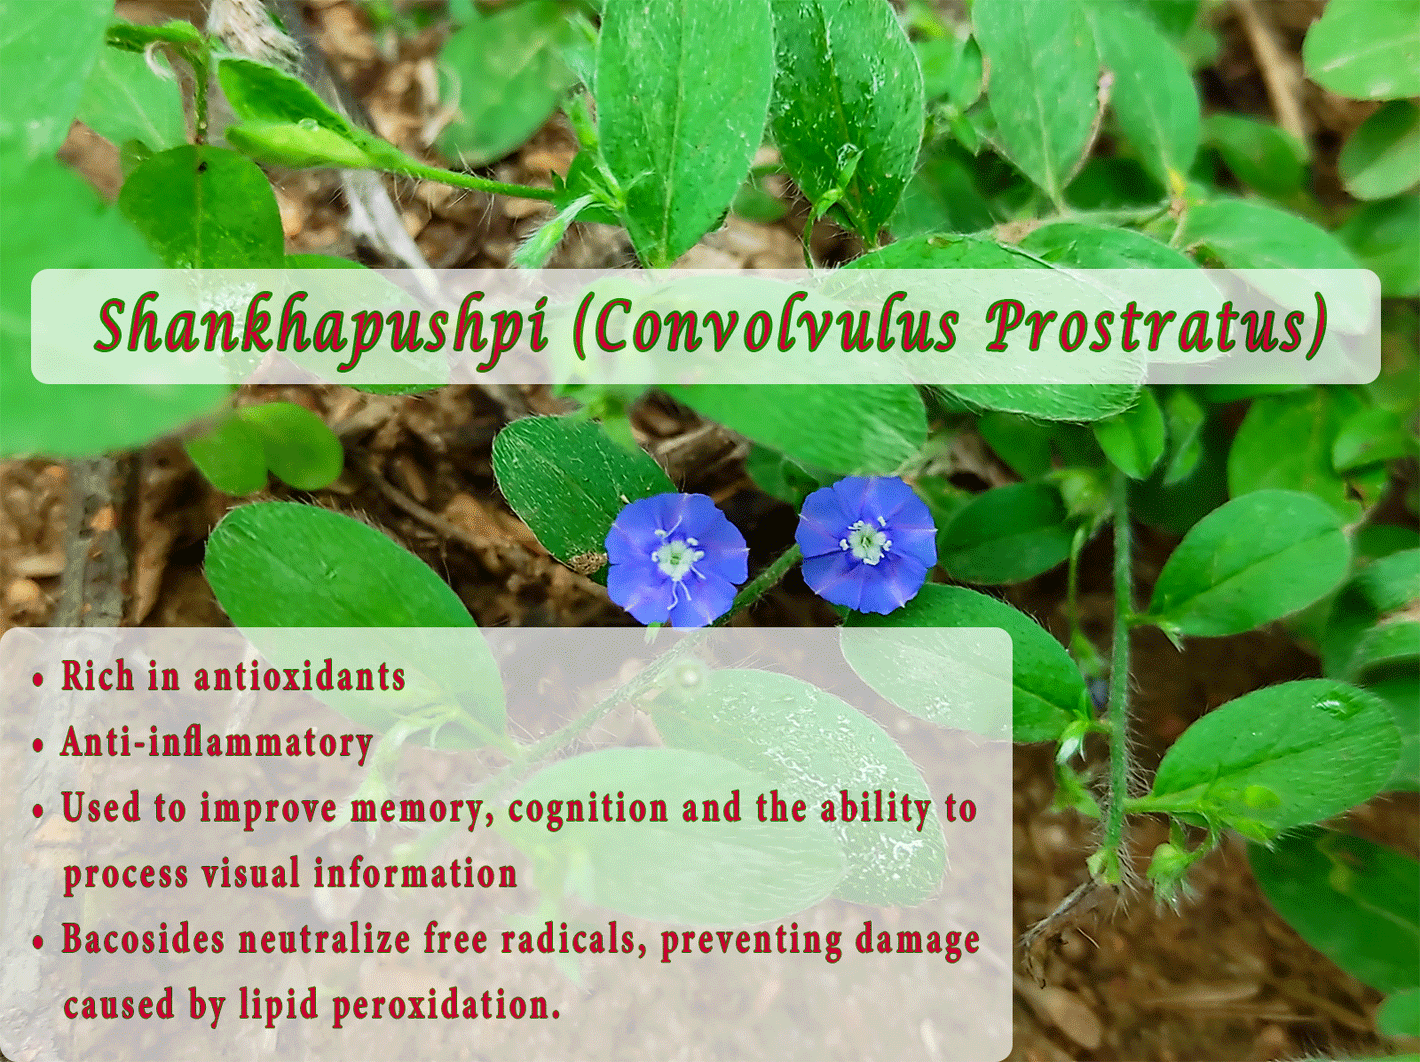 Shankhapushpi (Convolvulus Prostratus) •	Rich in antioxidants •	Anti-inflammatory •	Used to improve memory, cognition and the ability to process visual information •	Bacosides neutralize free radicals, preventing damage caused by lipid peroxidation.